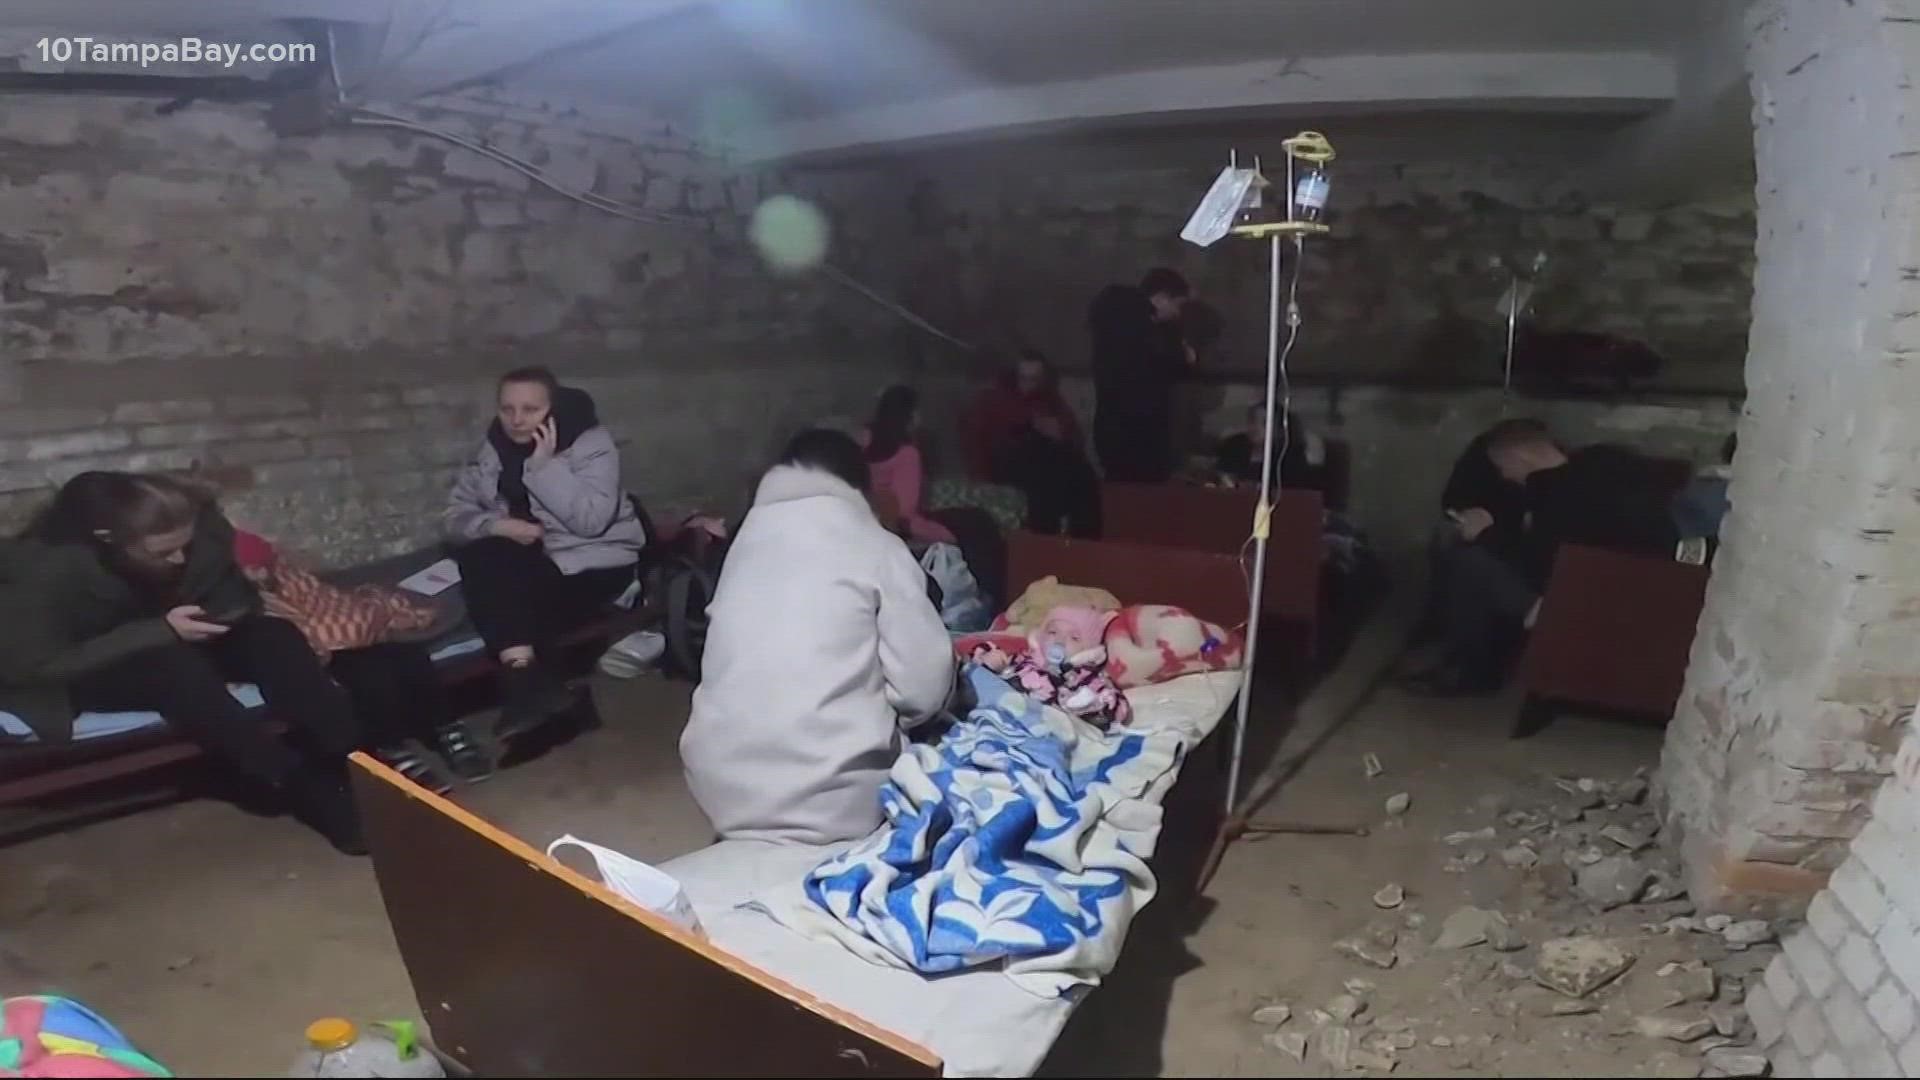 Ukraine Bomb Shelters Scenes From Inside Bunkers Amid Invasion 6687